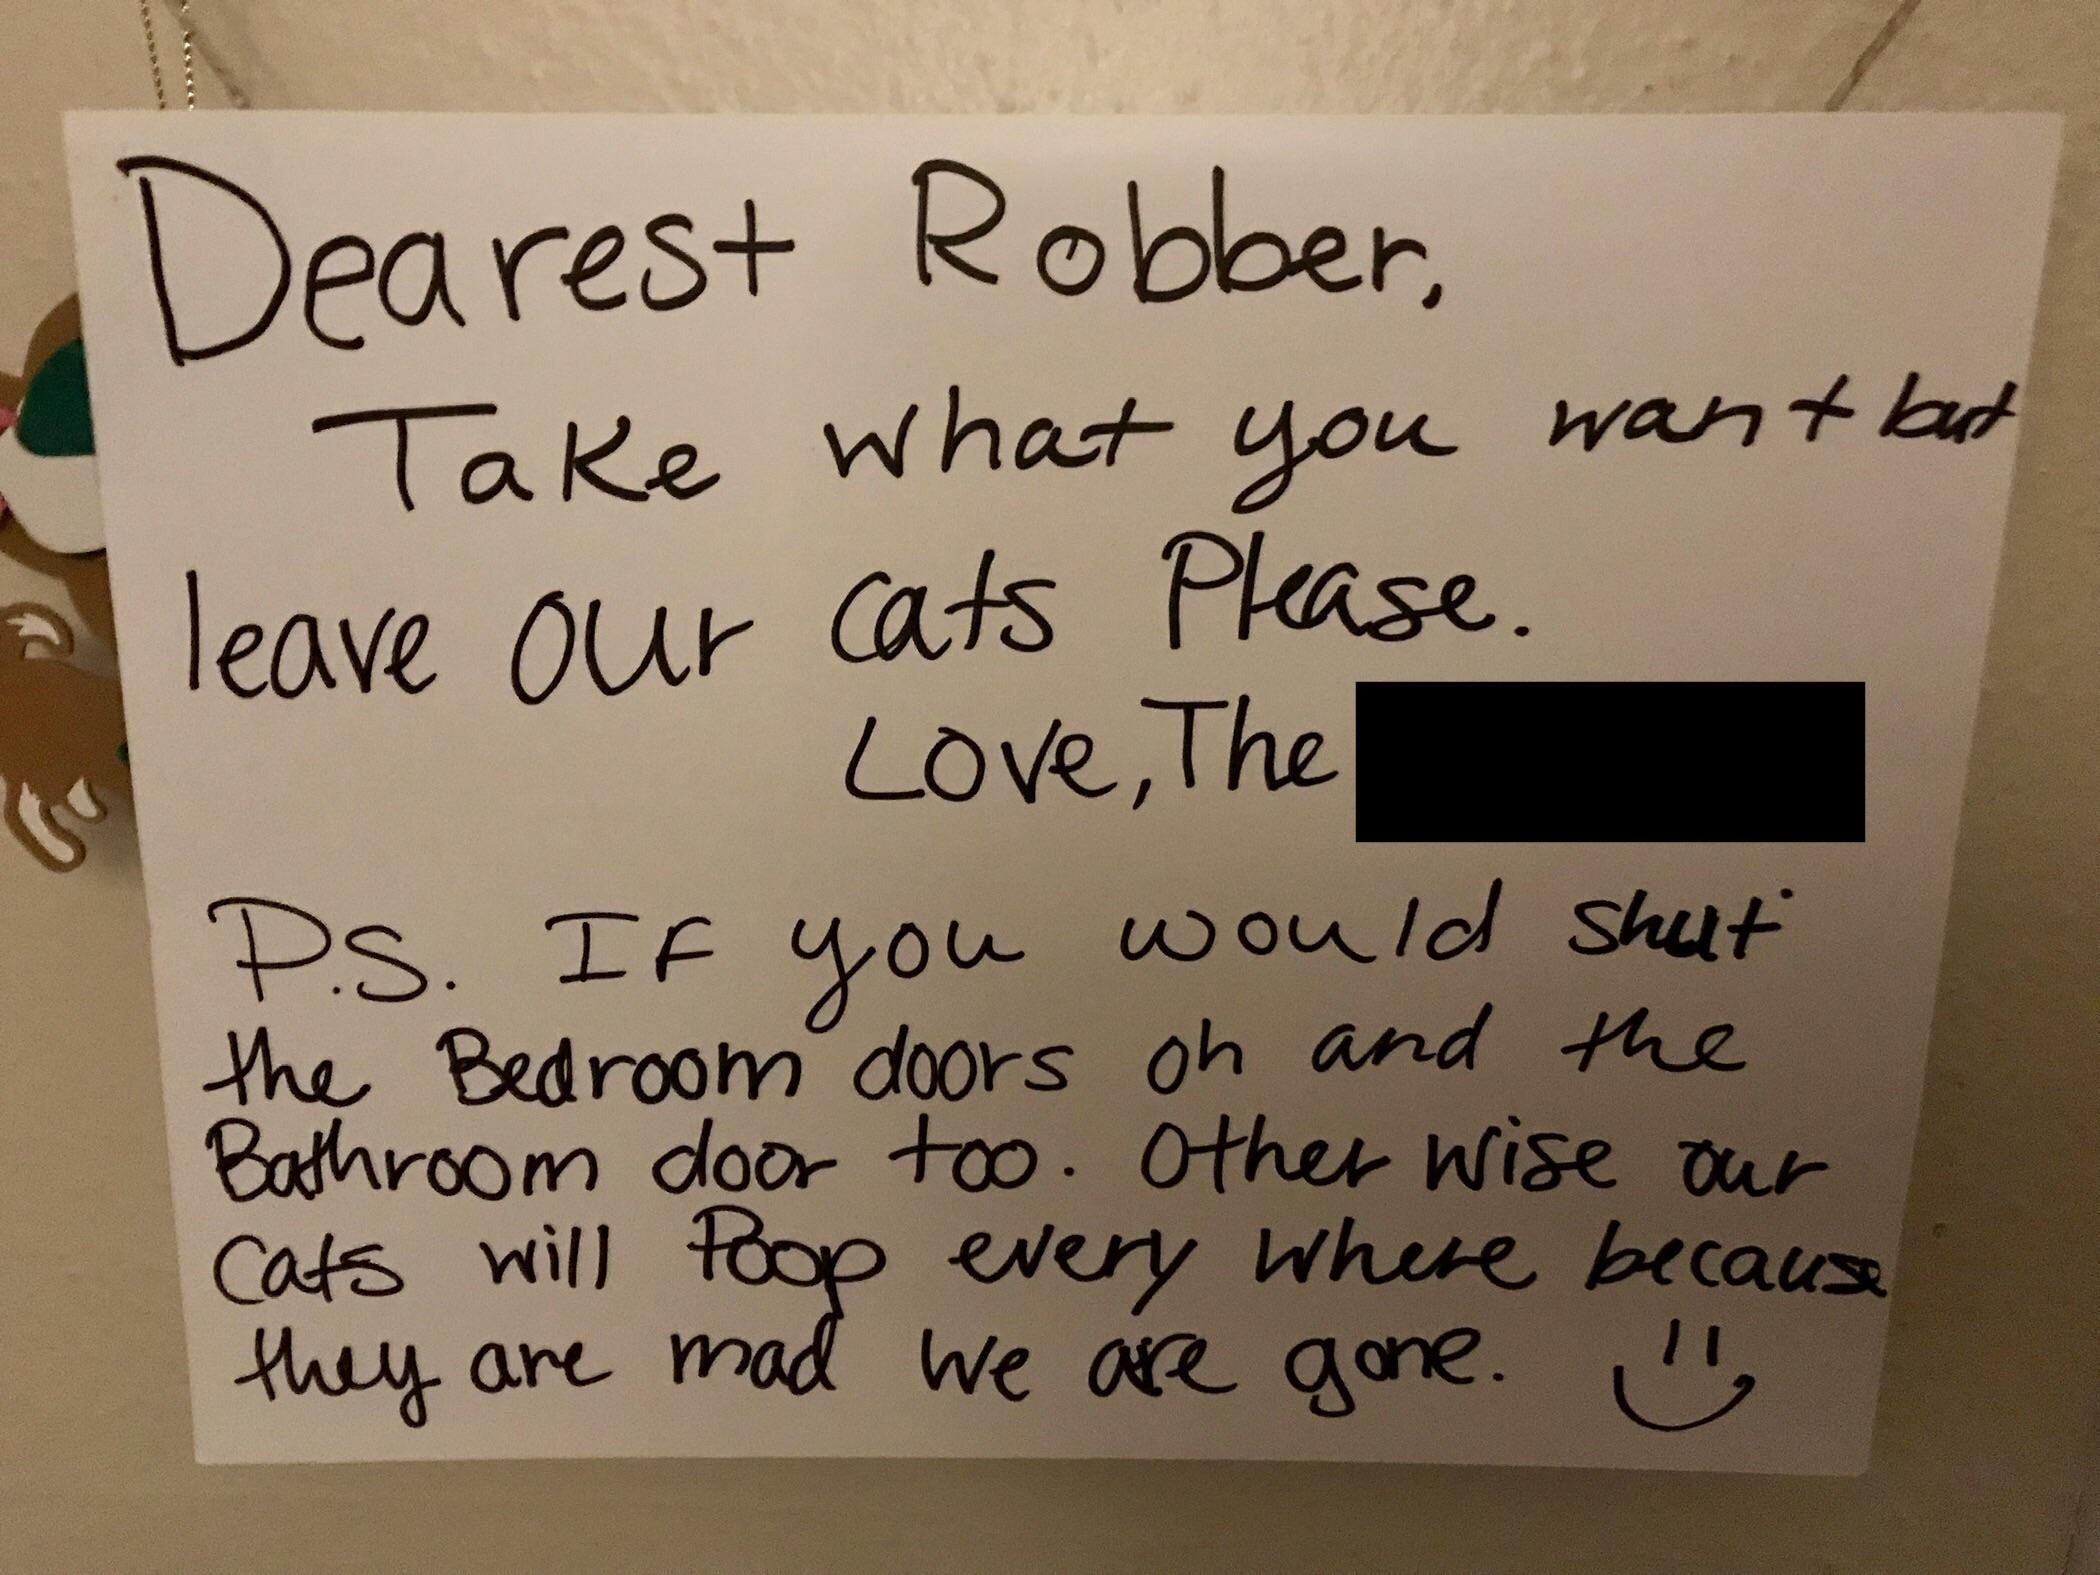 Wife’s last defense to protect her babies